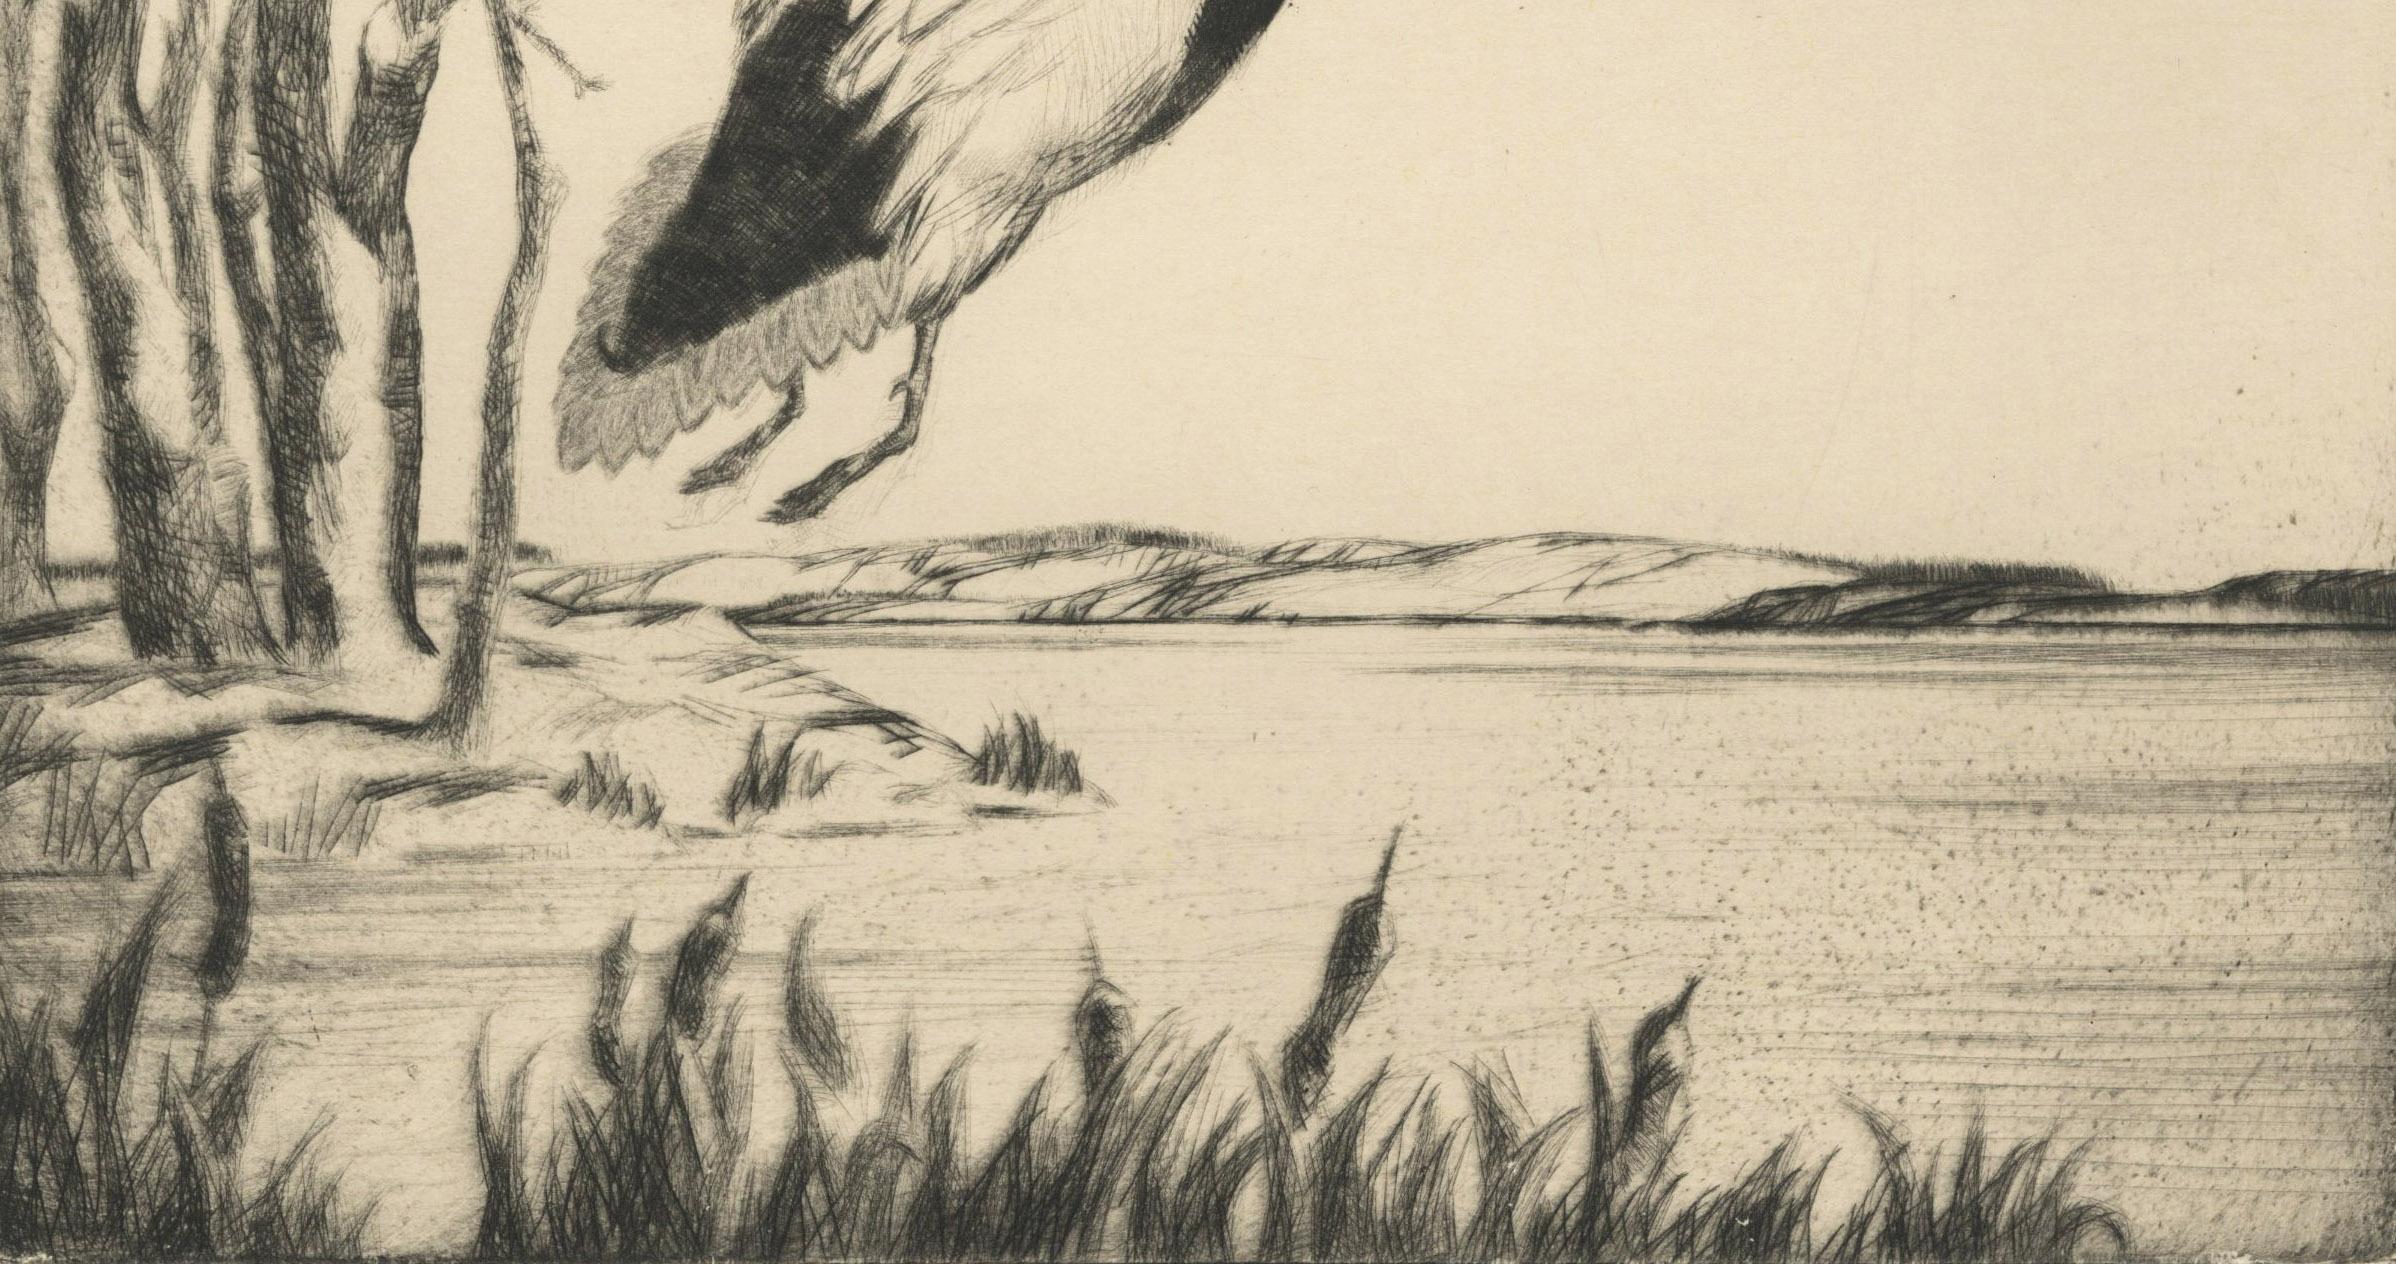 Untitled (Three Ducks Taking to Flight)
Drypoint, c. 1940
Signed lower right
Provenance: Estate of the Artist
                      Winchell Heirs by descent
Condition: Excellent
Image/Plate size: 10 1/2 x 8 1/4 inches
Sheet size: 12 1/2 x 10 5/16